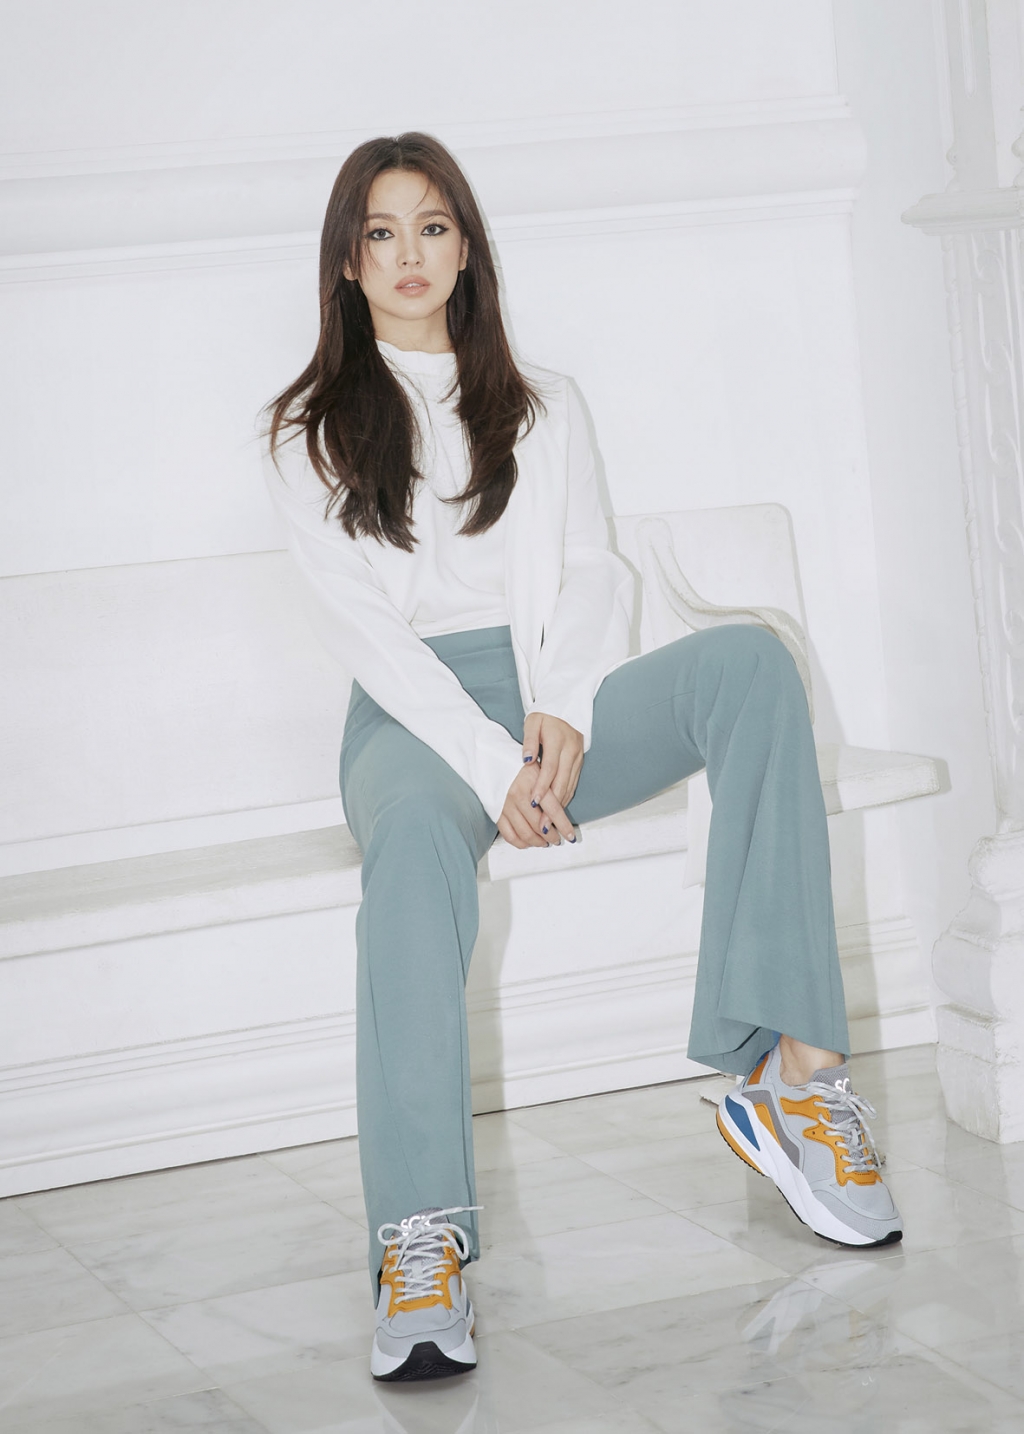 Actor Song Hye-kyo showed chic makeup and lovely style in the picture.The contemporary shoes brand Shucomma Bonnie, developed by Kolon Industries FnC (hereinafter referred to as Kolon FnC), released a campaign picture on the 19th with SHINE ON ME with Muse Song Hye-kyo for the 2019 F/W season.Shucomma Bonnie expressed a woman who can enjoy and enjoy her style by herself through the brand Muse Song Hye-kyo and various design shoes.Song Hye-kyo in the picture matched the beige knit and white long skirt with the shoulder line, matching the lovely color shoes, the neat white blouse and the mint pants with the splashing sneakers.Shoes made by Song Hye-kyo in the picture are made of soft sheepskin material, and it is a coy with comfortable grip and knitwear high line.On the other hand, Shucomma Bonnie will hold a Queens Snickers Early Bird Promotion, which will present a discount coupon of 30,000 won at Kolon Mall and Shucomma Bonnie offline store, until September 1 to commemorate the release of the SHINE ON ME campaign.